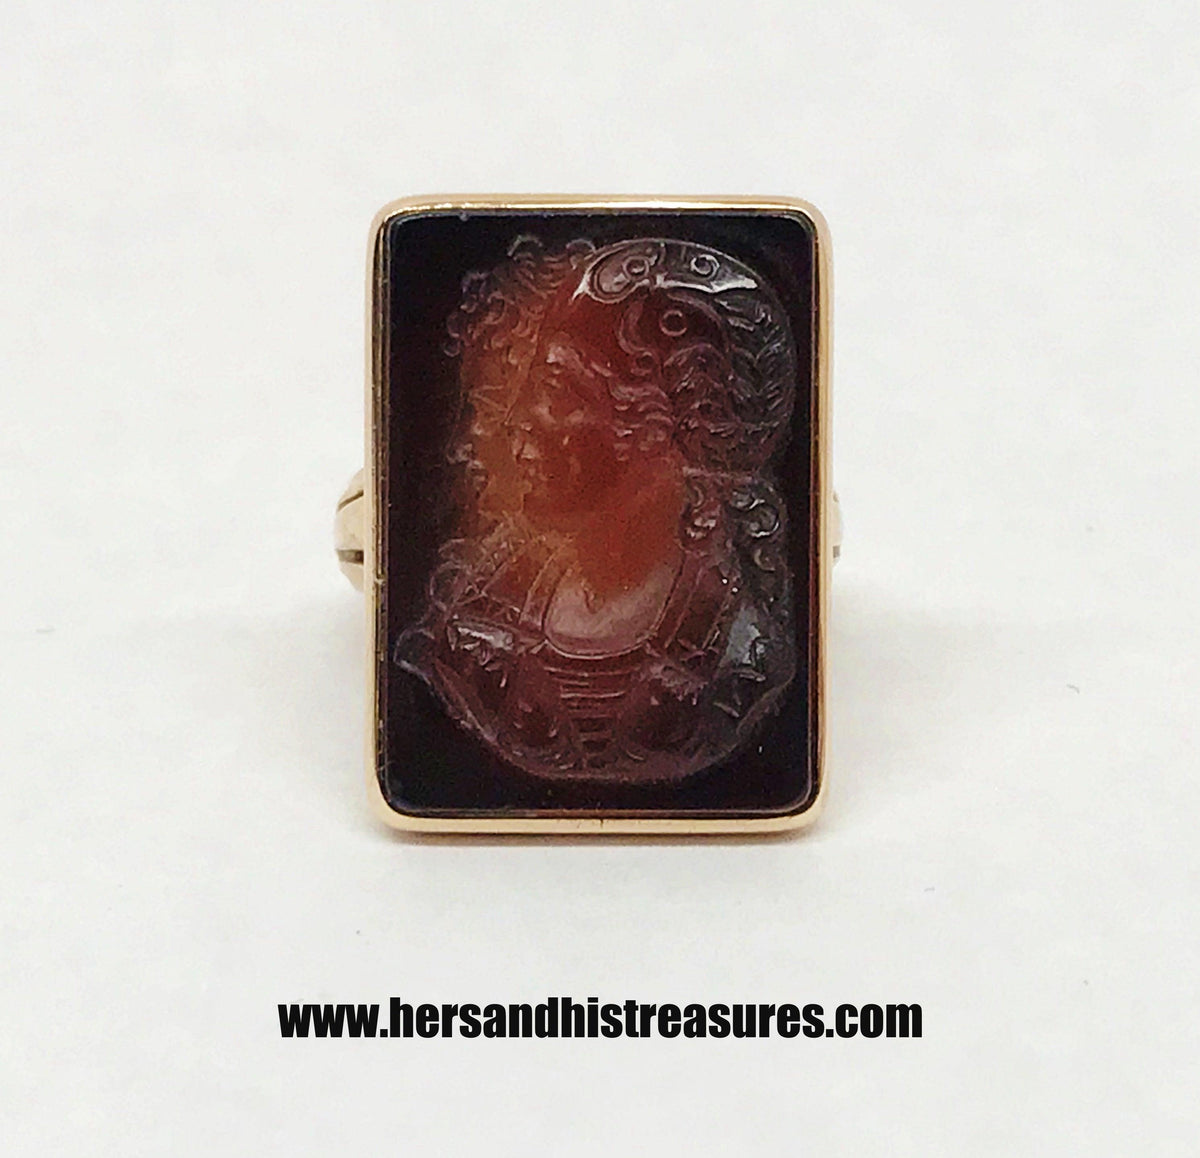 Rare 1878 Victorian 10K Double Carved Man and Woman Carnelian Cameo and Intaglio Ring - Hers and His Treasures